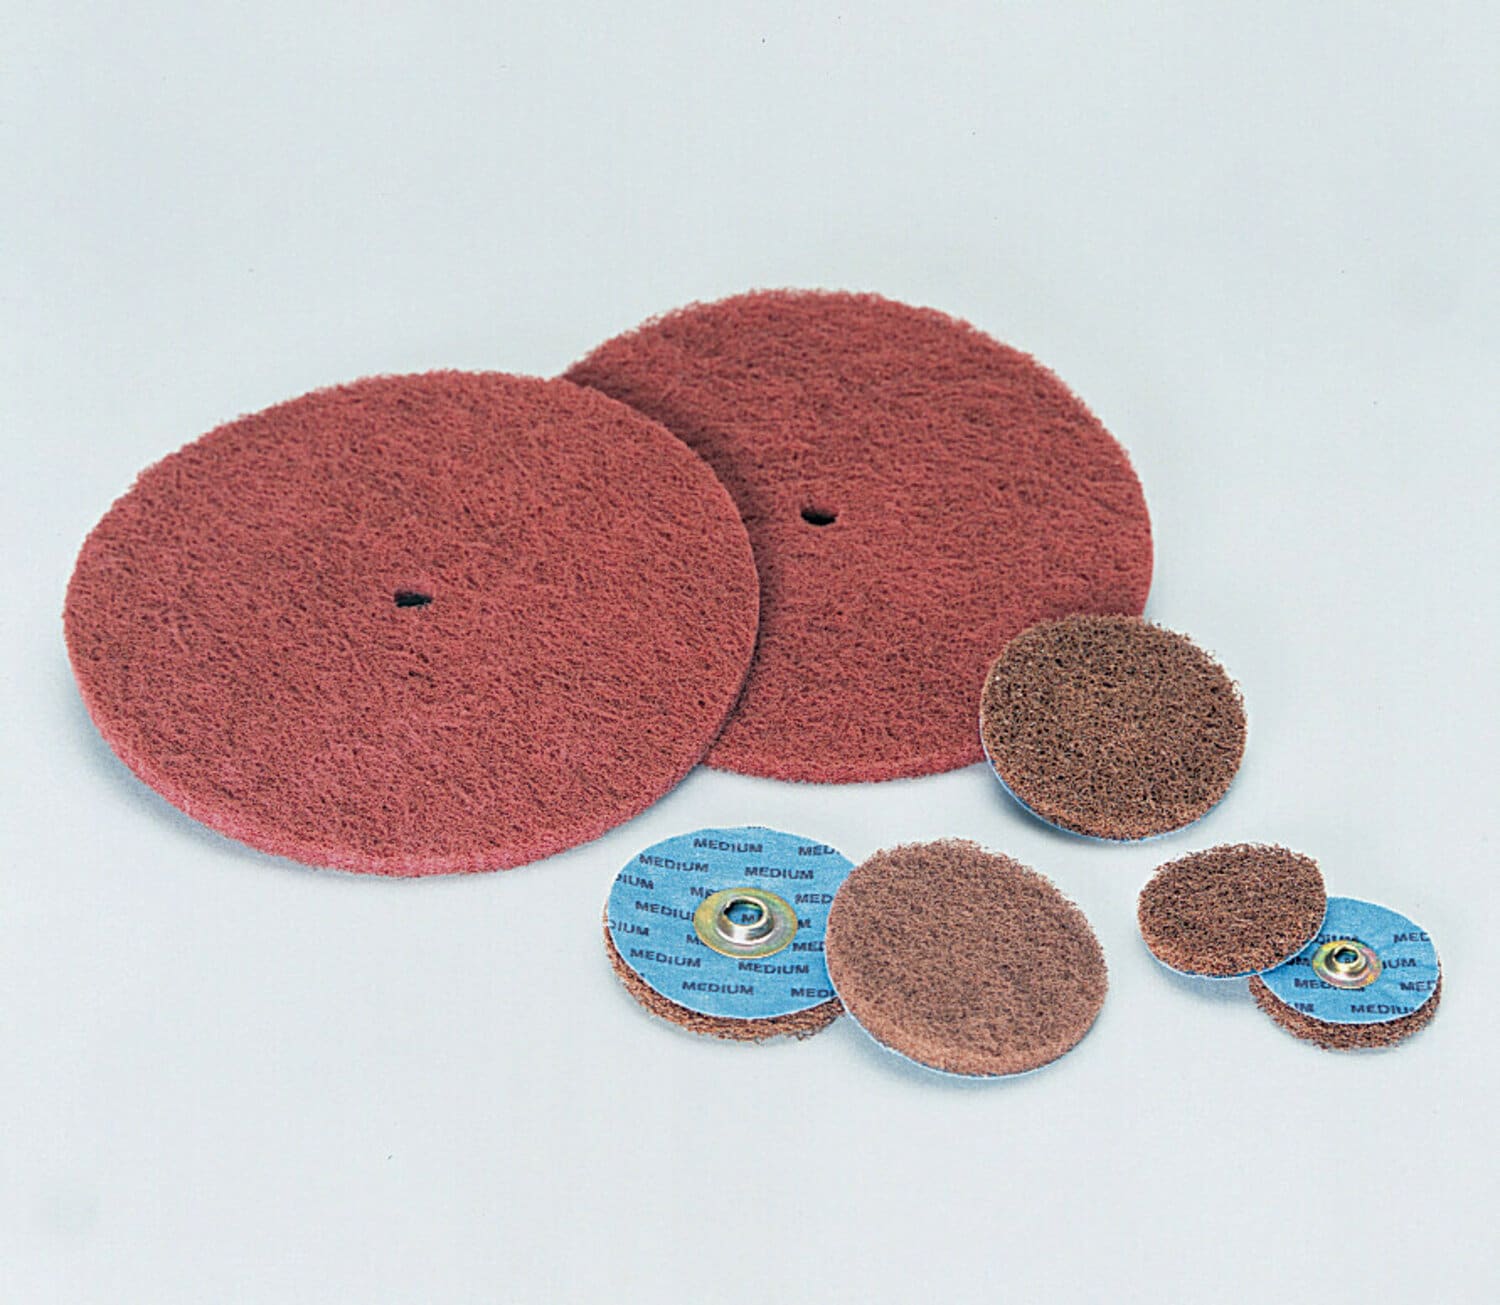 7010368549 - Standard Abrasives Buff and Blend GP Disc 843710, 6 in x 1/4 in, A MED,
100 ea/Case